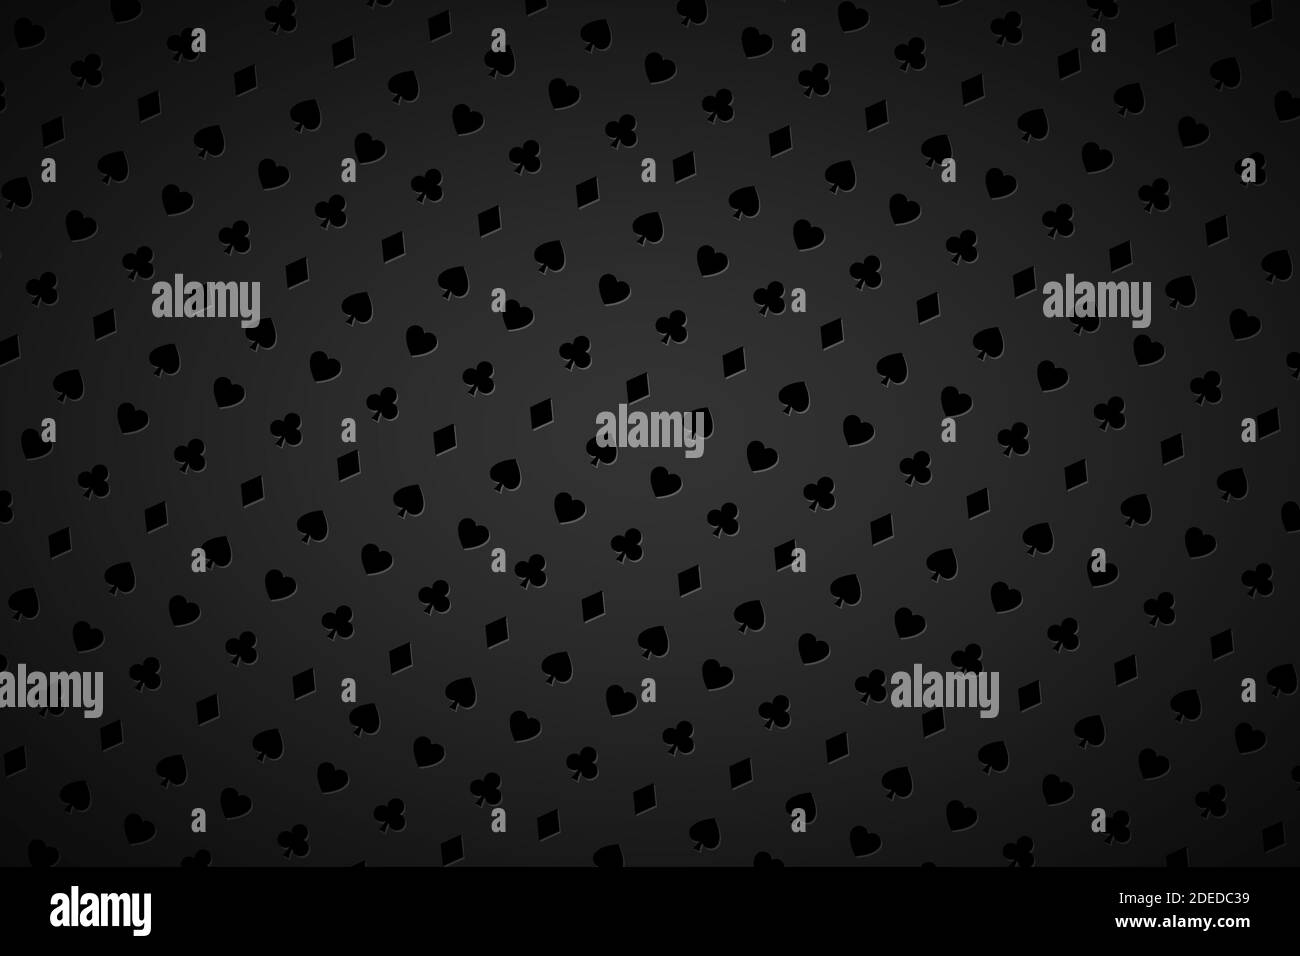 Modern abstract casino background with playing card signs. Poker symbols on black background. Casino symbols. Vector widescreen wallpaper Stock Vector